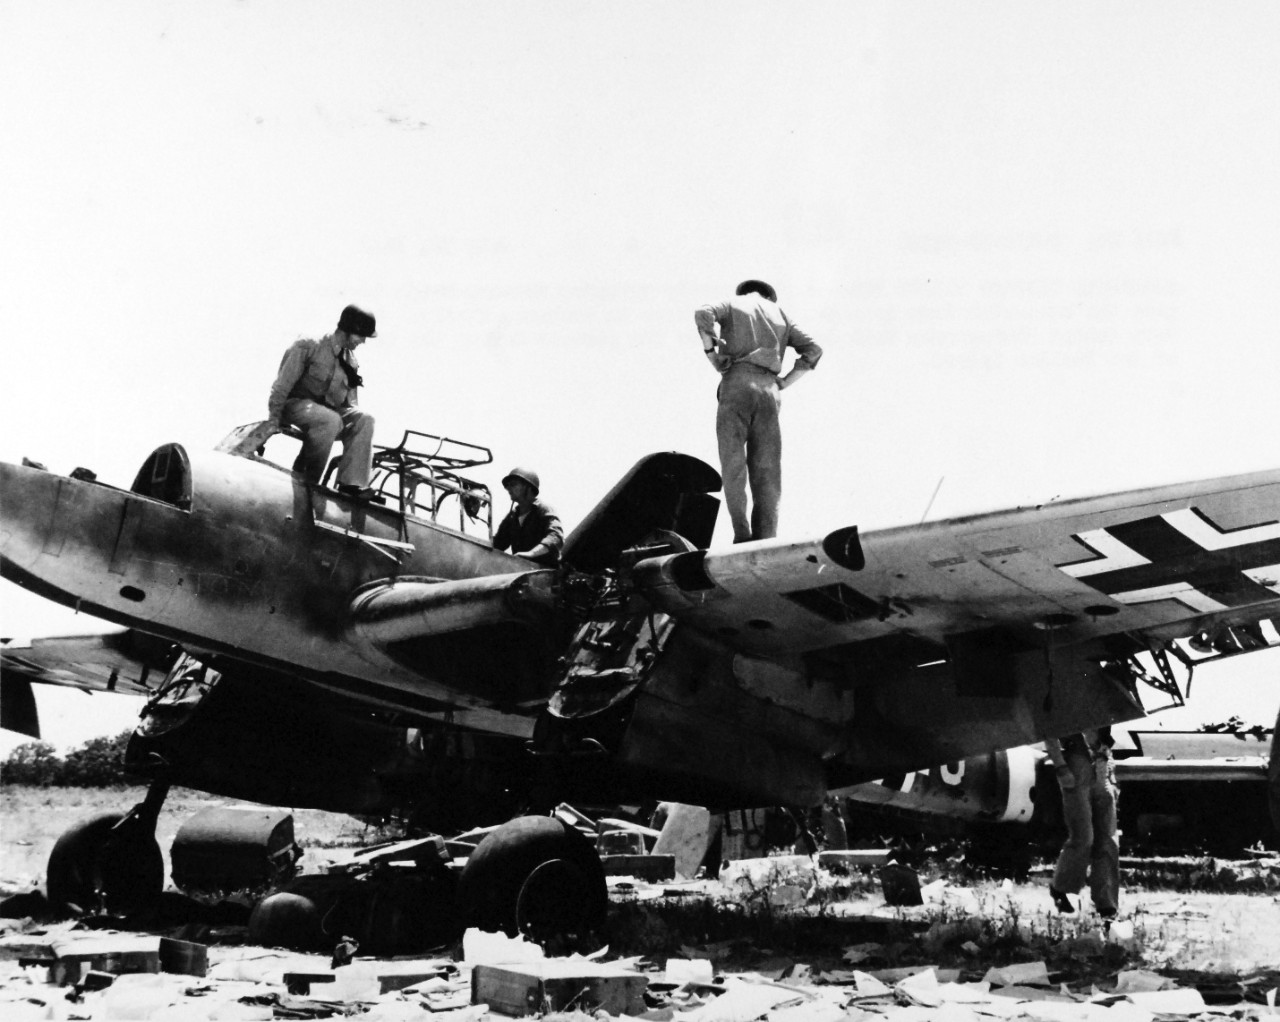 80-G-54546:  Operation Husky, July-August 1943.   Americans look over a permanently grounded Messerschmidt after the invasion of Sicily on July 10th.    Photograph, July 1943.   Official U.S. Navy photograph, now in the collections of the National Archives.   (2016/07/19).